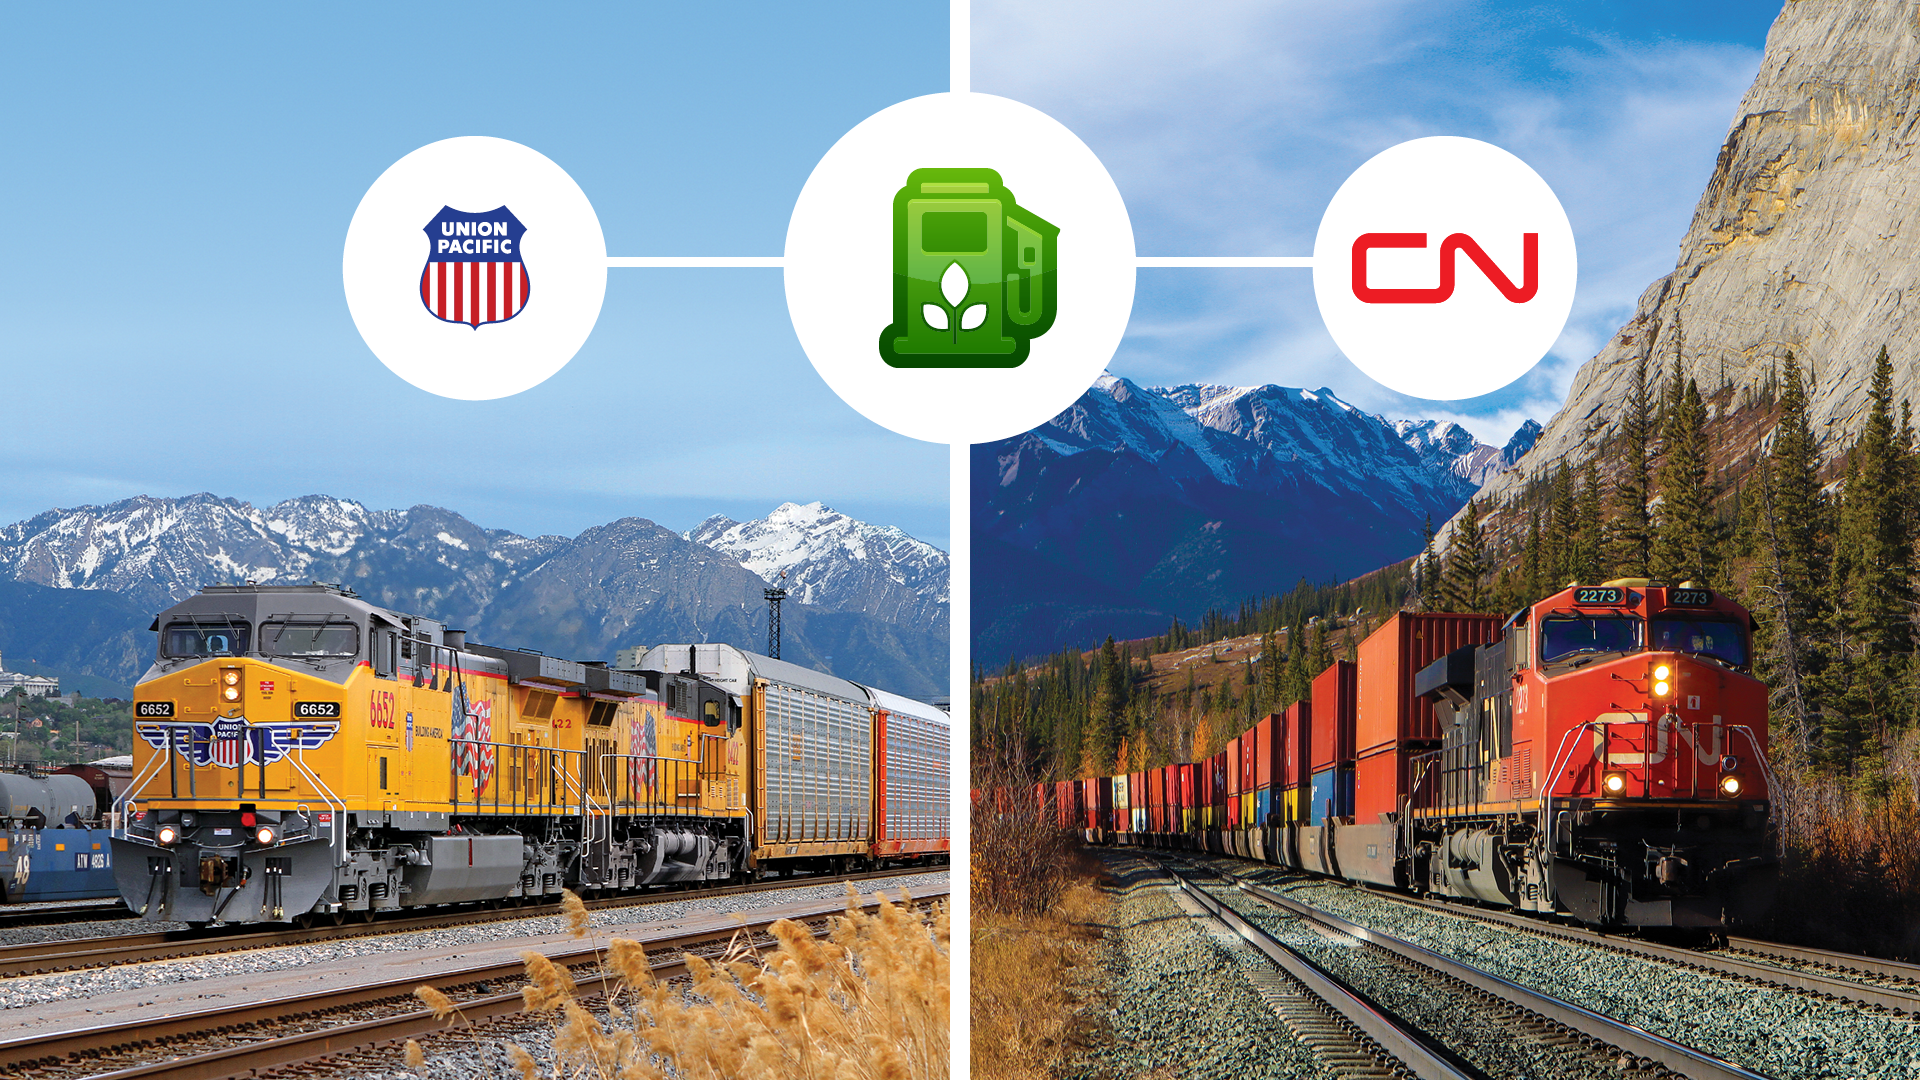 UP: Union Pacific and Canadian National Put Biofuels to the Test